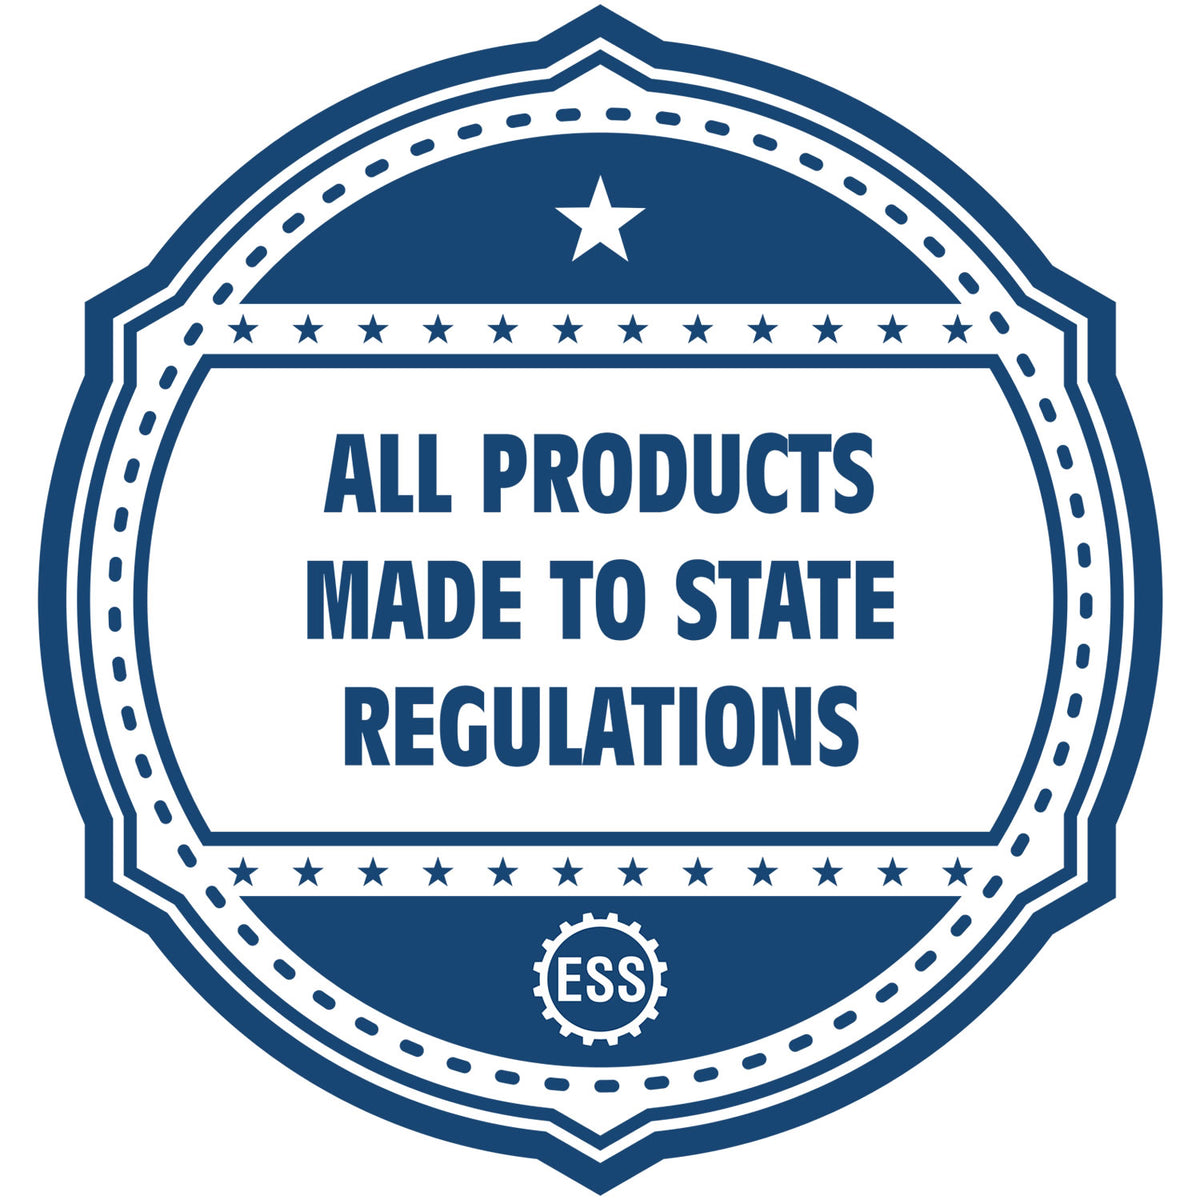 An icon or badge element for the Soft Pocket North Carolina Landscape Architect Embosser showing that this product is made in compliance with state regulations.